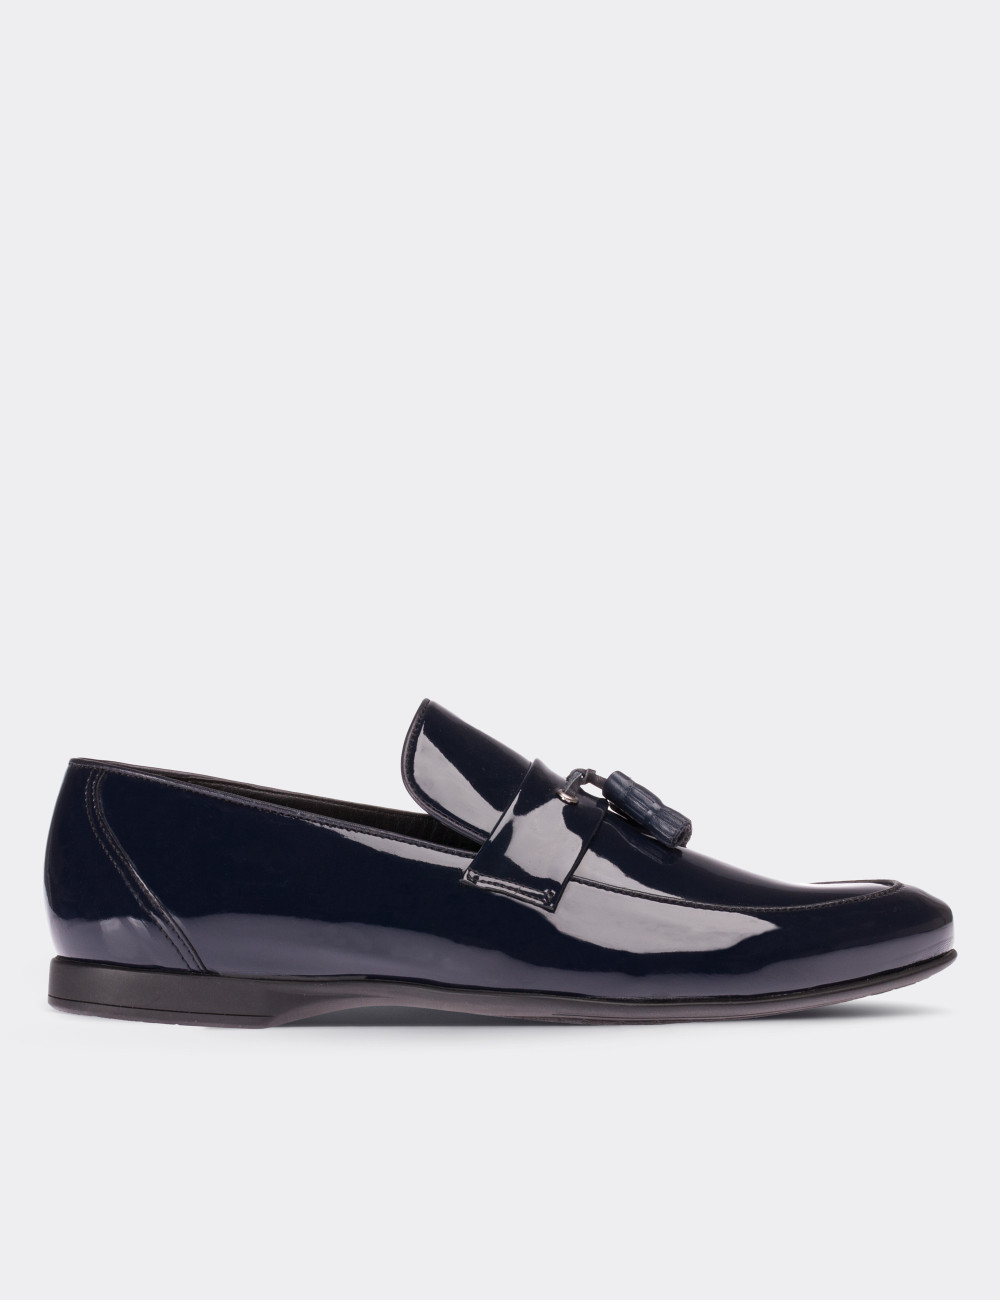 Navy Patent Leather Loafers - 01537MLCVC01